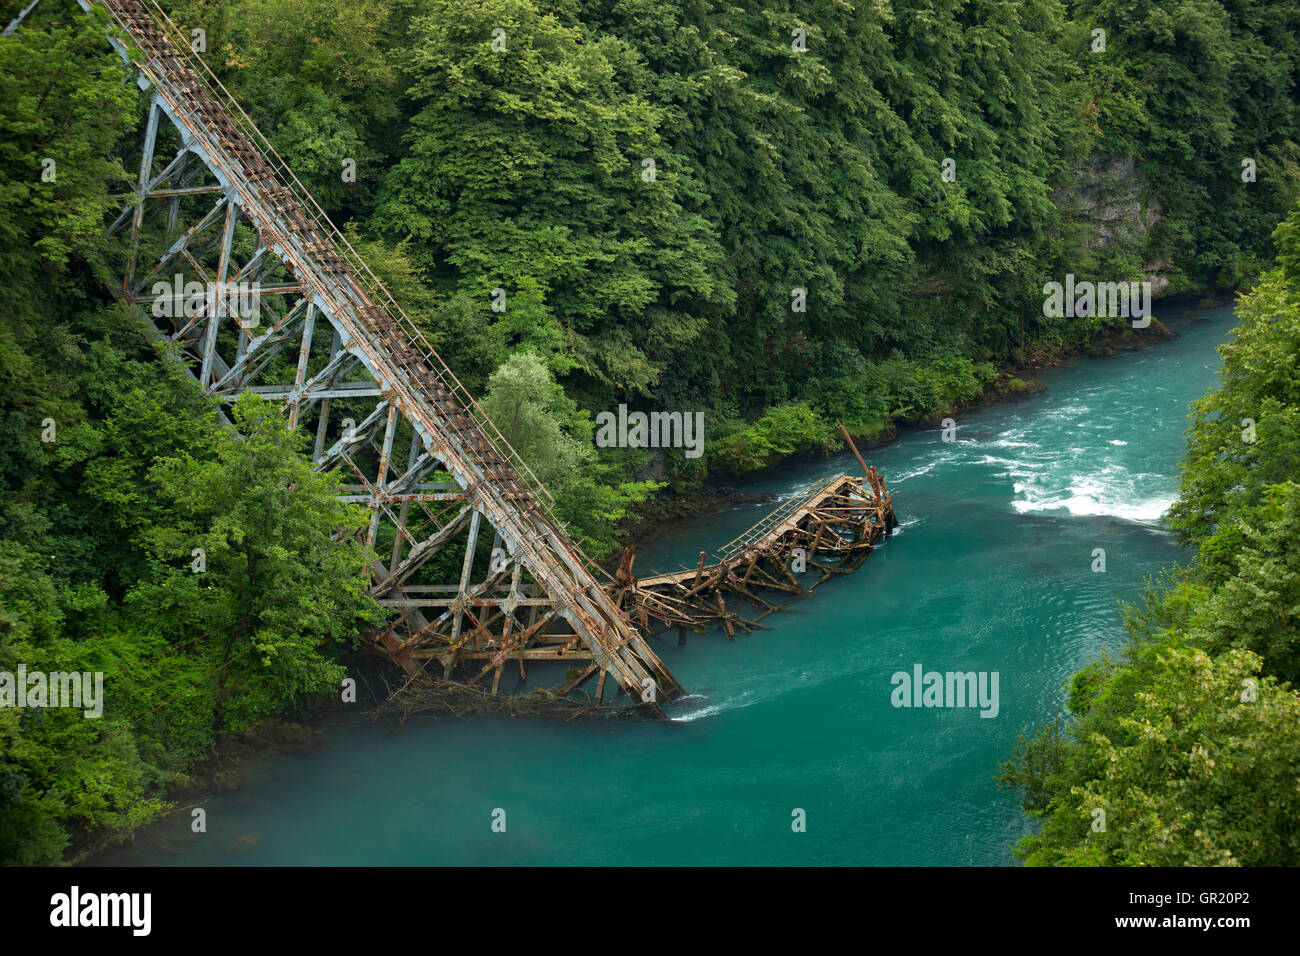 In the Jablanica area, a replica of a rail bridge destroyed at the time of the famous Neretva battle (Bosnia - Herzegovina). Stock Photo